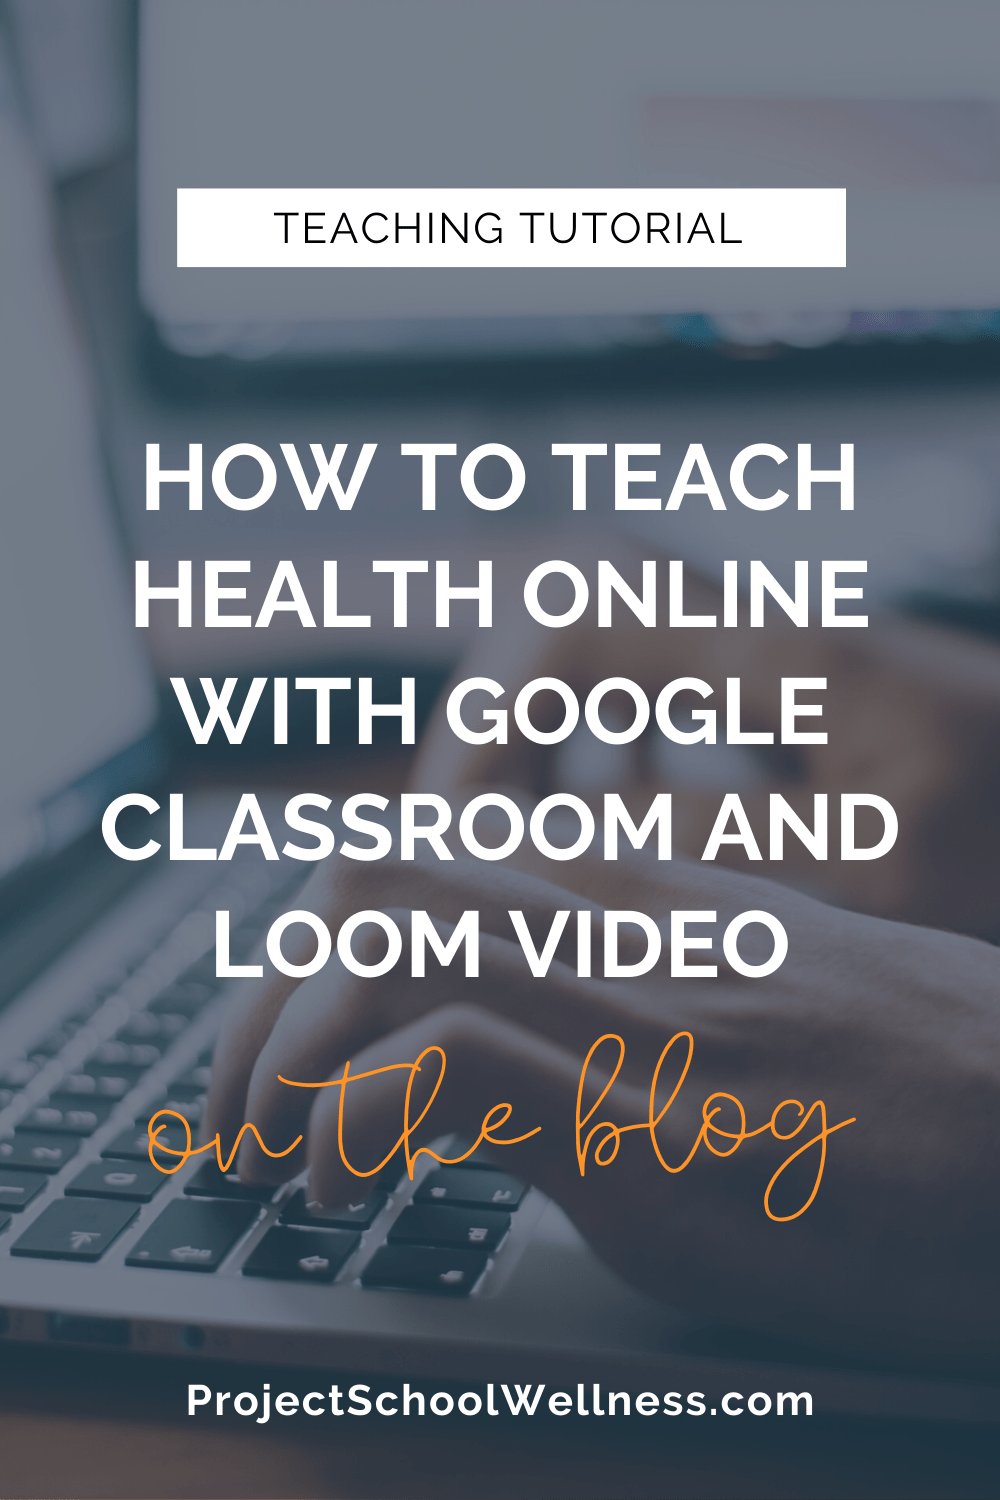 How To Teach Health Online With Google Classroom And Loom Video